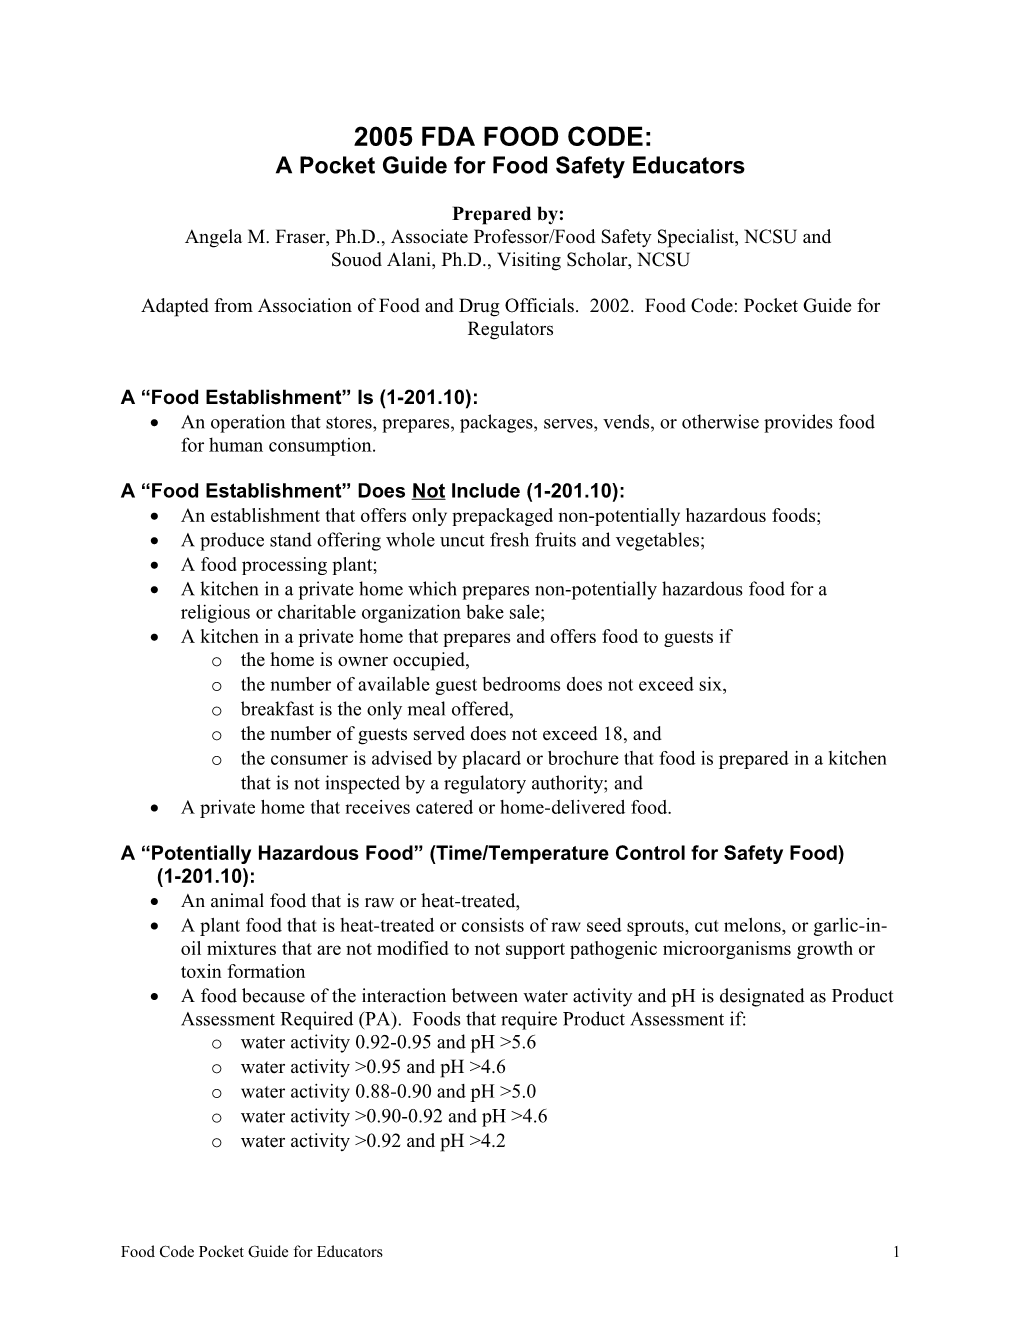 FOOD CODE: a Pocket Guide for Food Safety Educators